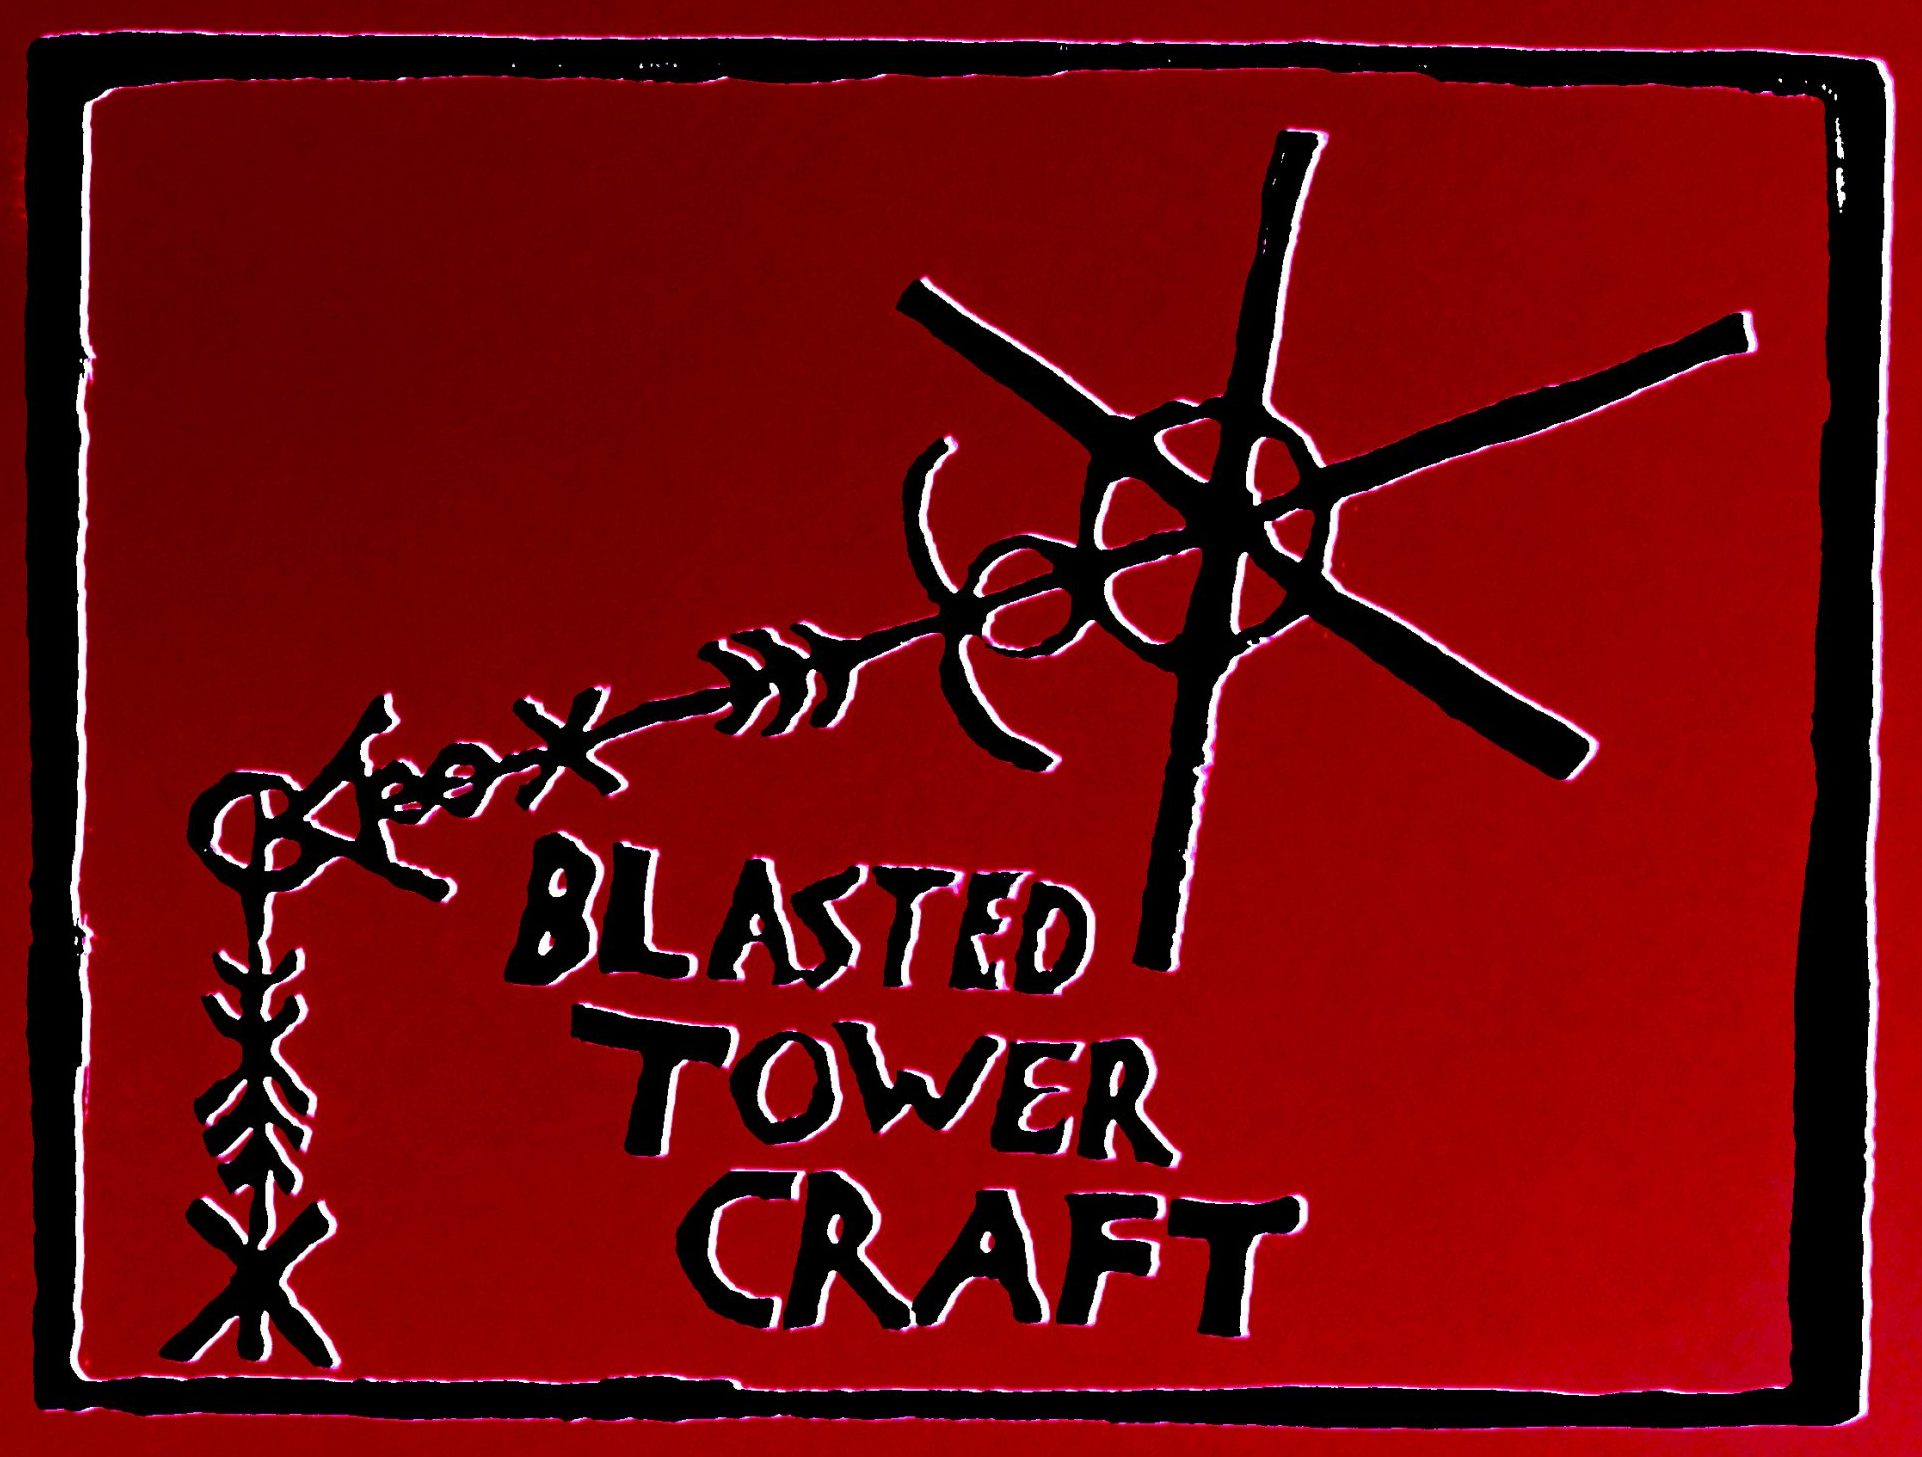 The Blasted Tower